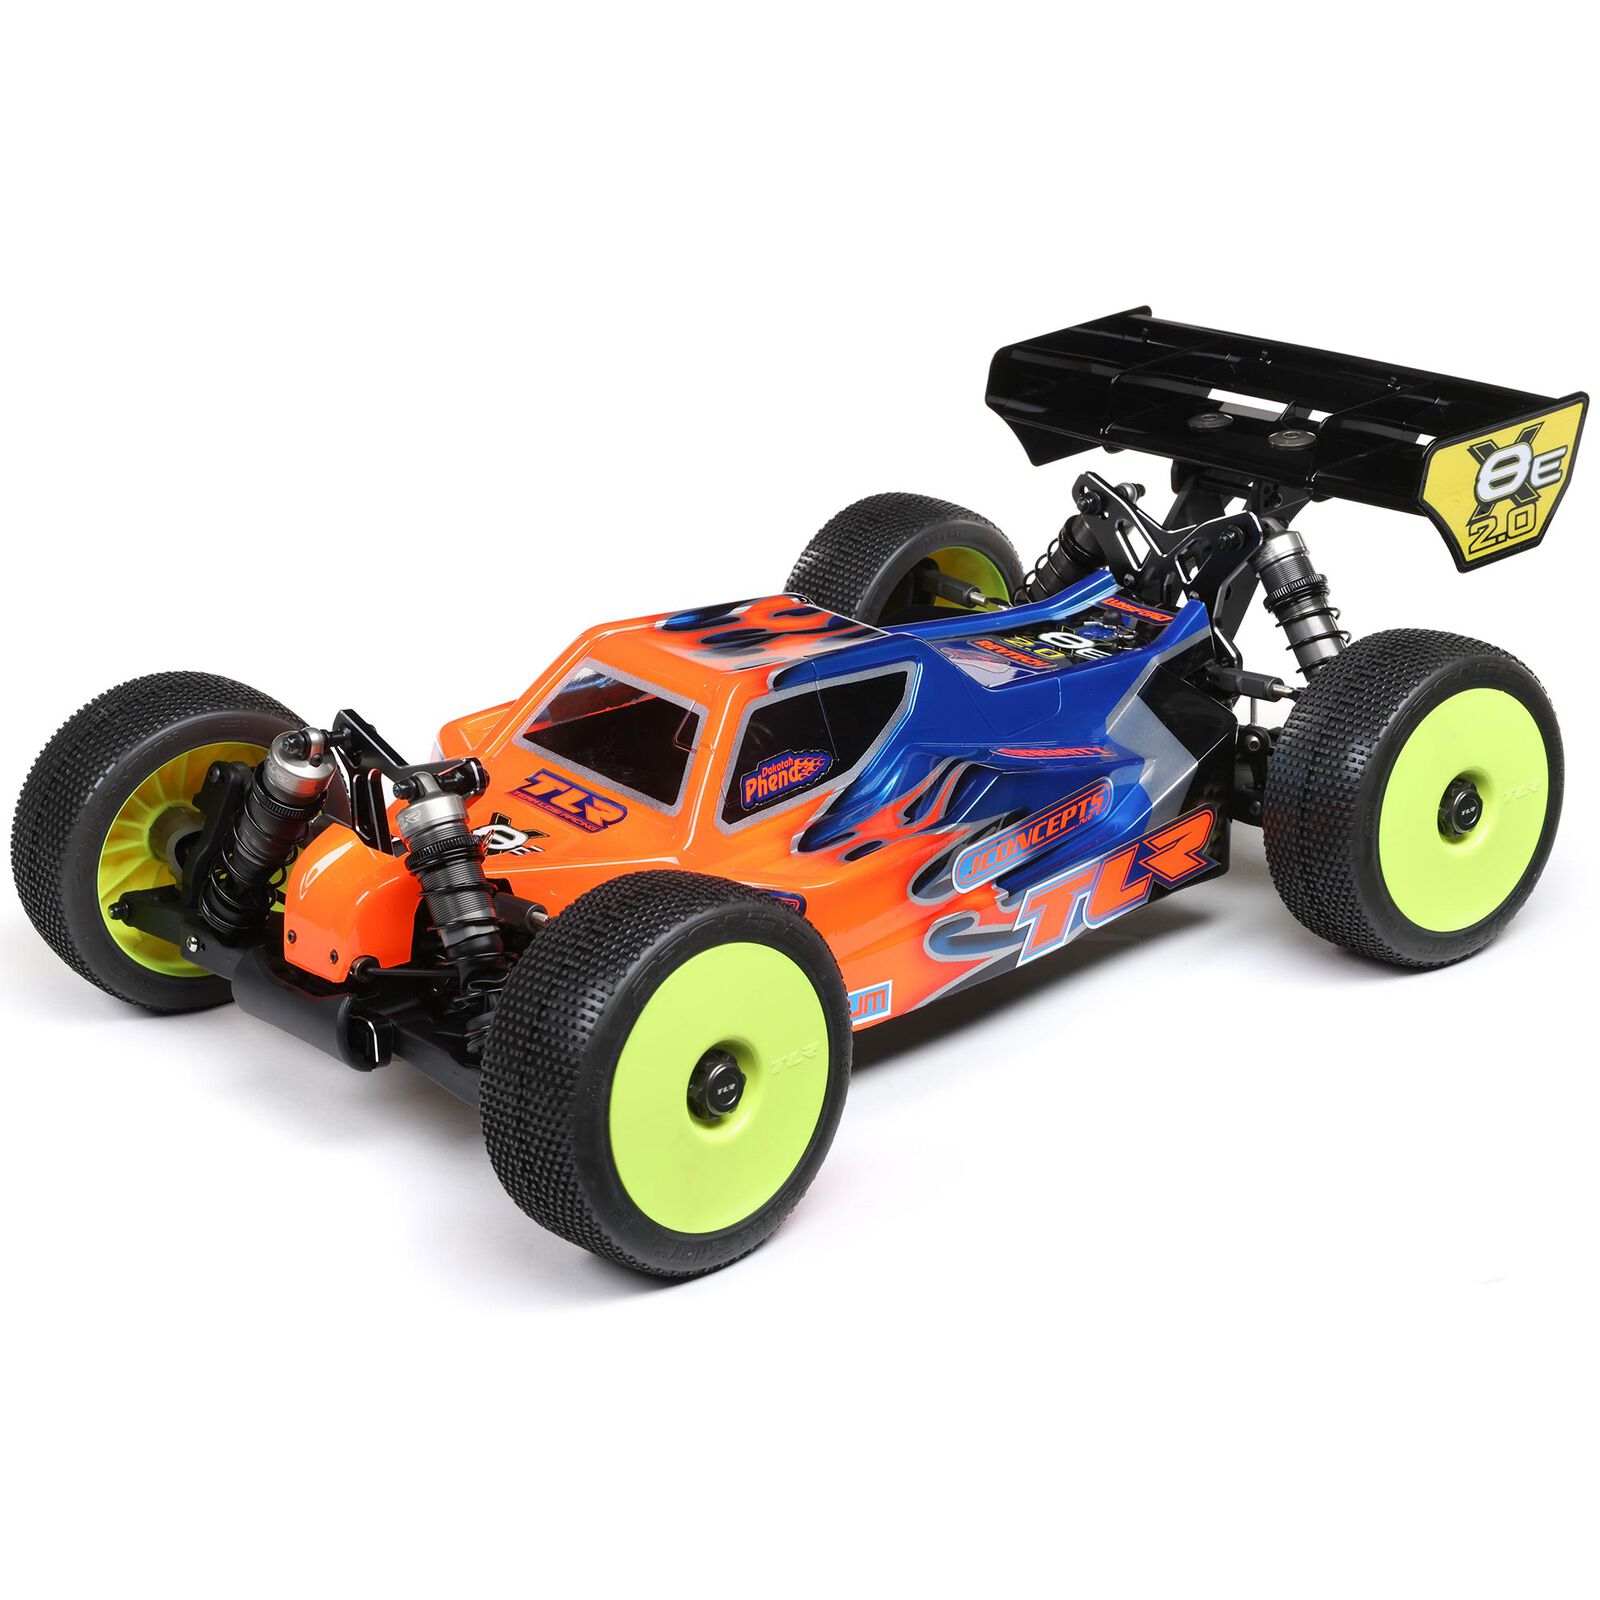 TLR 04012 - 1/8 8IGHT-X/E 2.0 Combo 4WD Nitro/Electric Race Buggy Kit